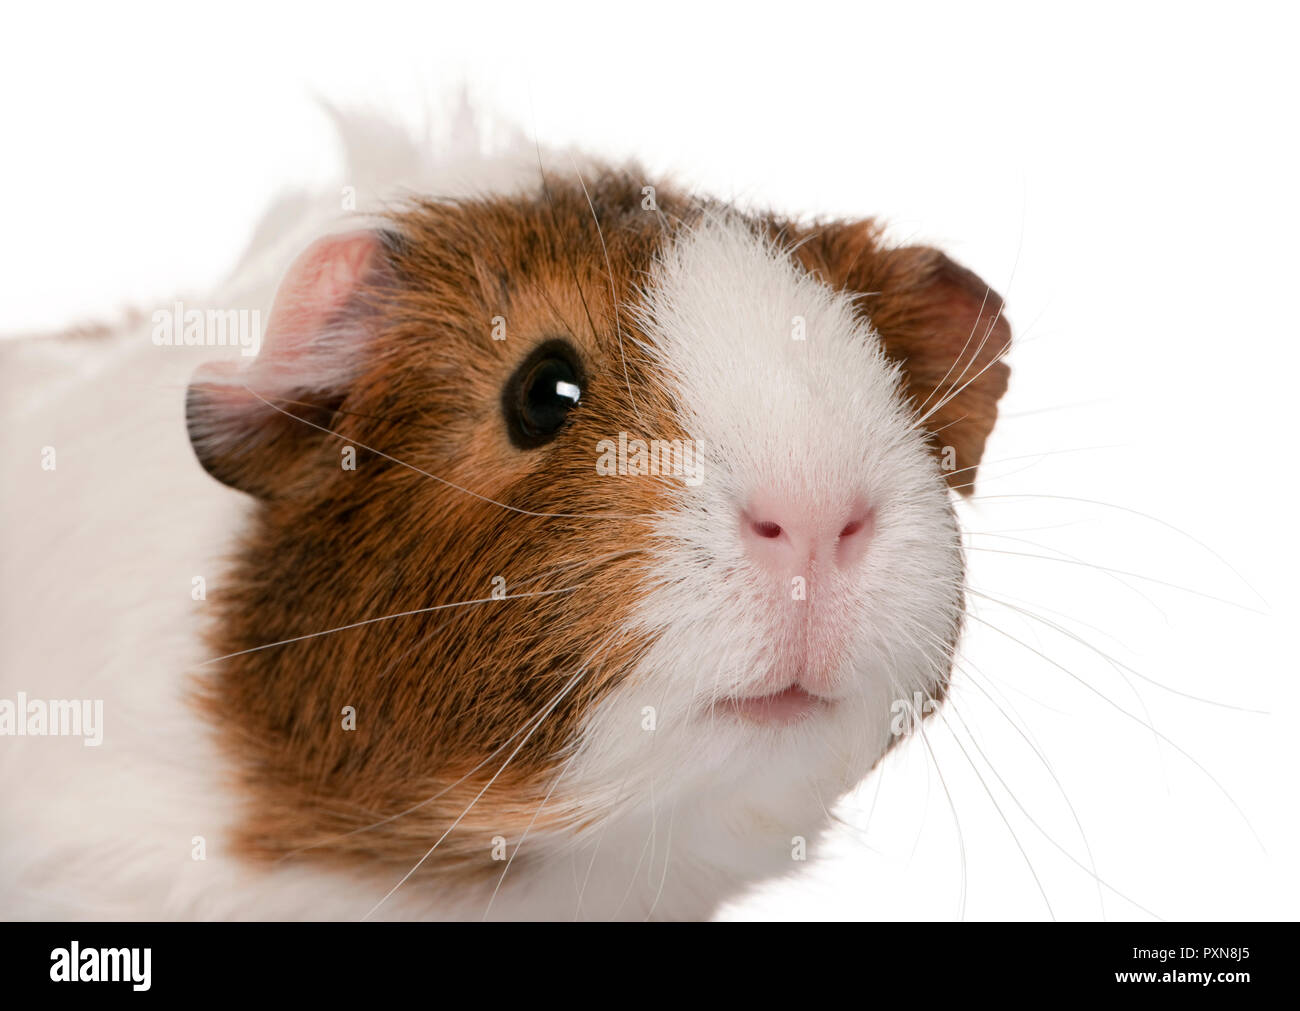 Guinea pig, Cavia porcellus, in front of white background Stock Photo